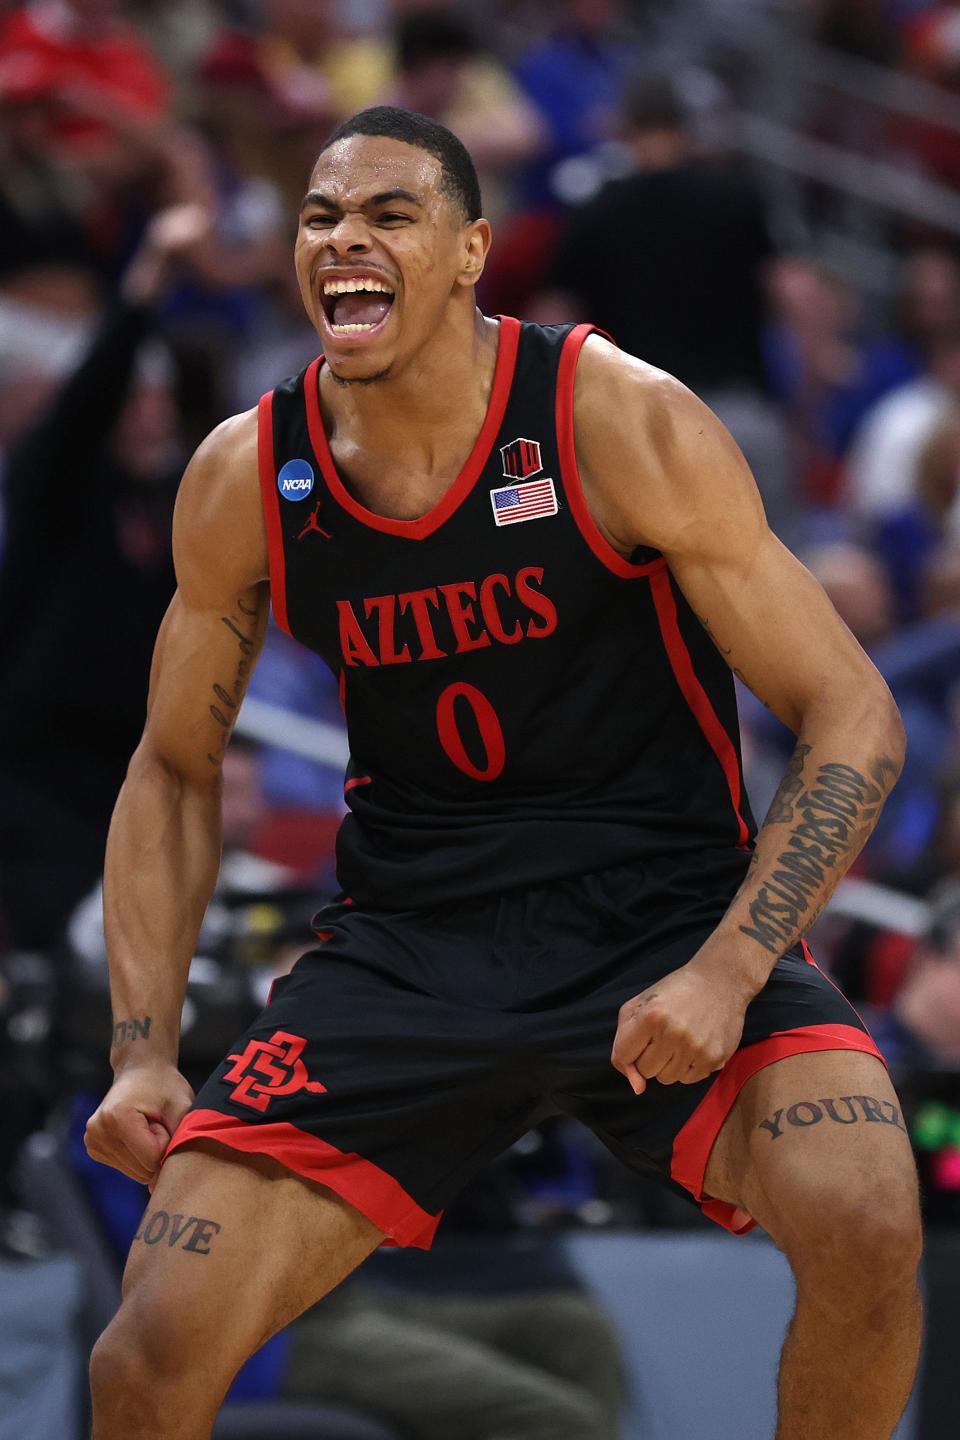 March 24, 2023: Keshad Johnson #0 of the San Diego State Aztecs celebrates after defeating Alabama Crimson Tide, 71-64, during the second half in the Sweet 16 round of the NCAA Men's Basketball Tournament at KFC YUM! Center in Louisville, Kentucky.